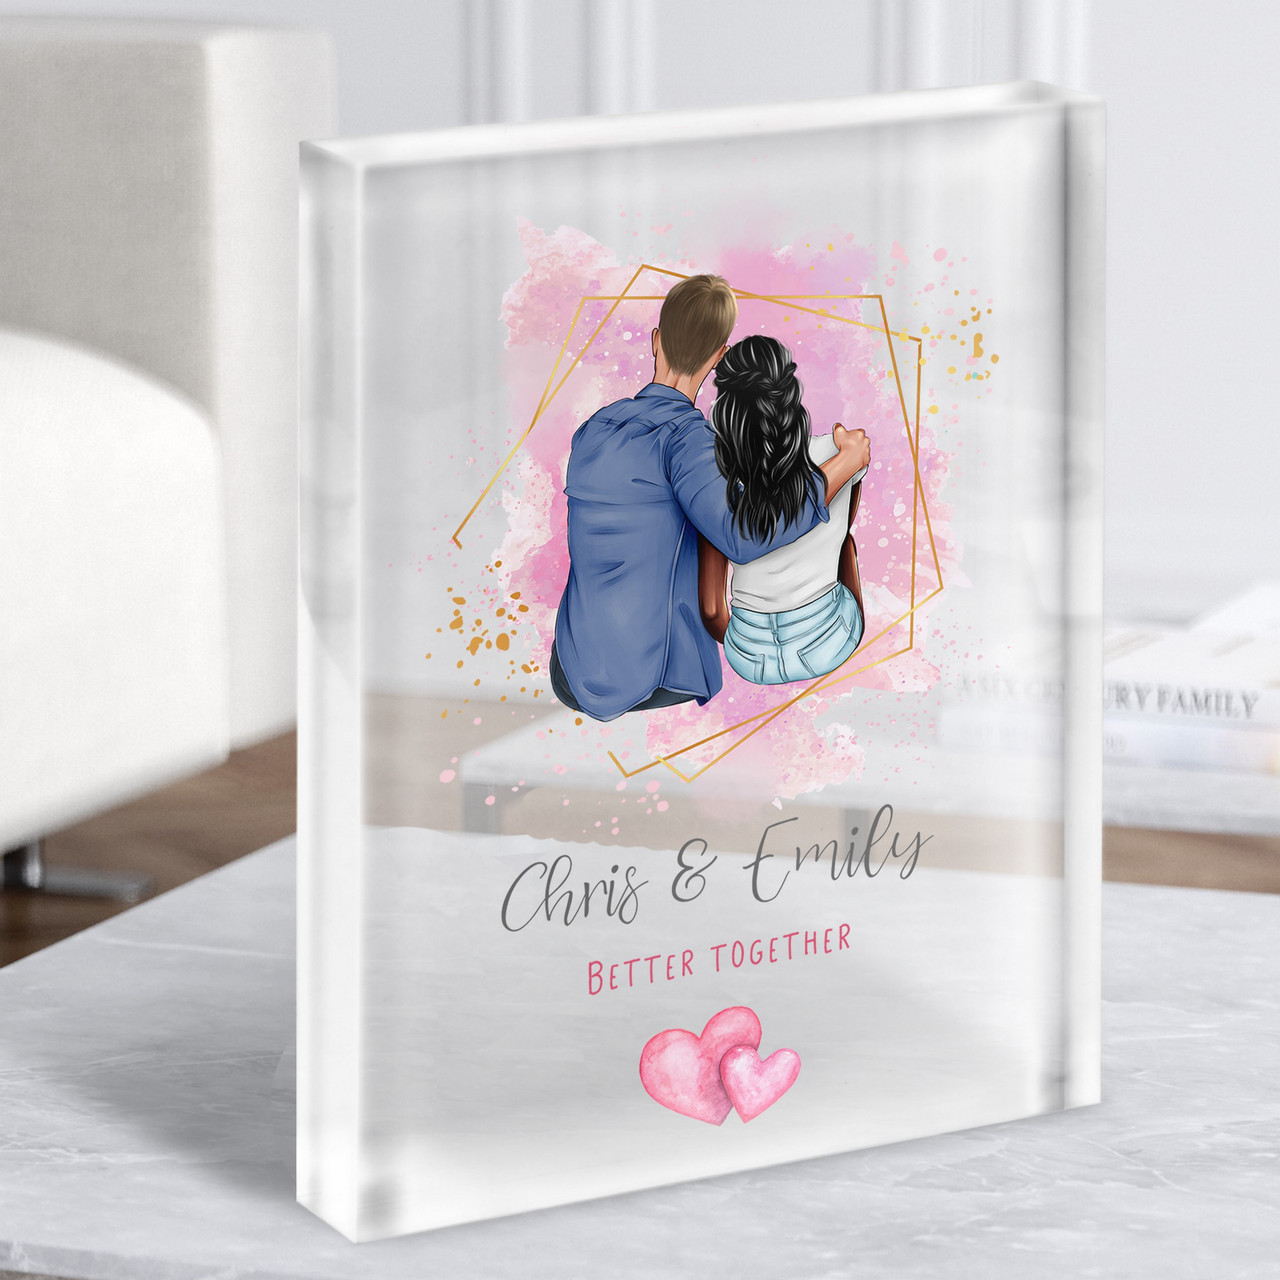  Valentine's Gifts for Wife - Engraved Acrylic Block